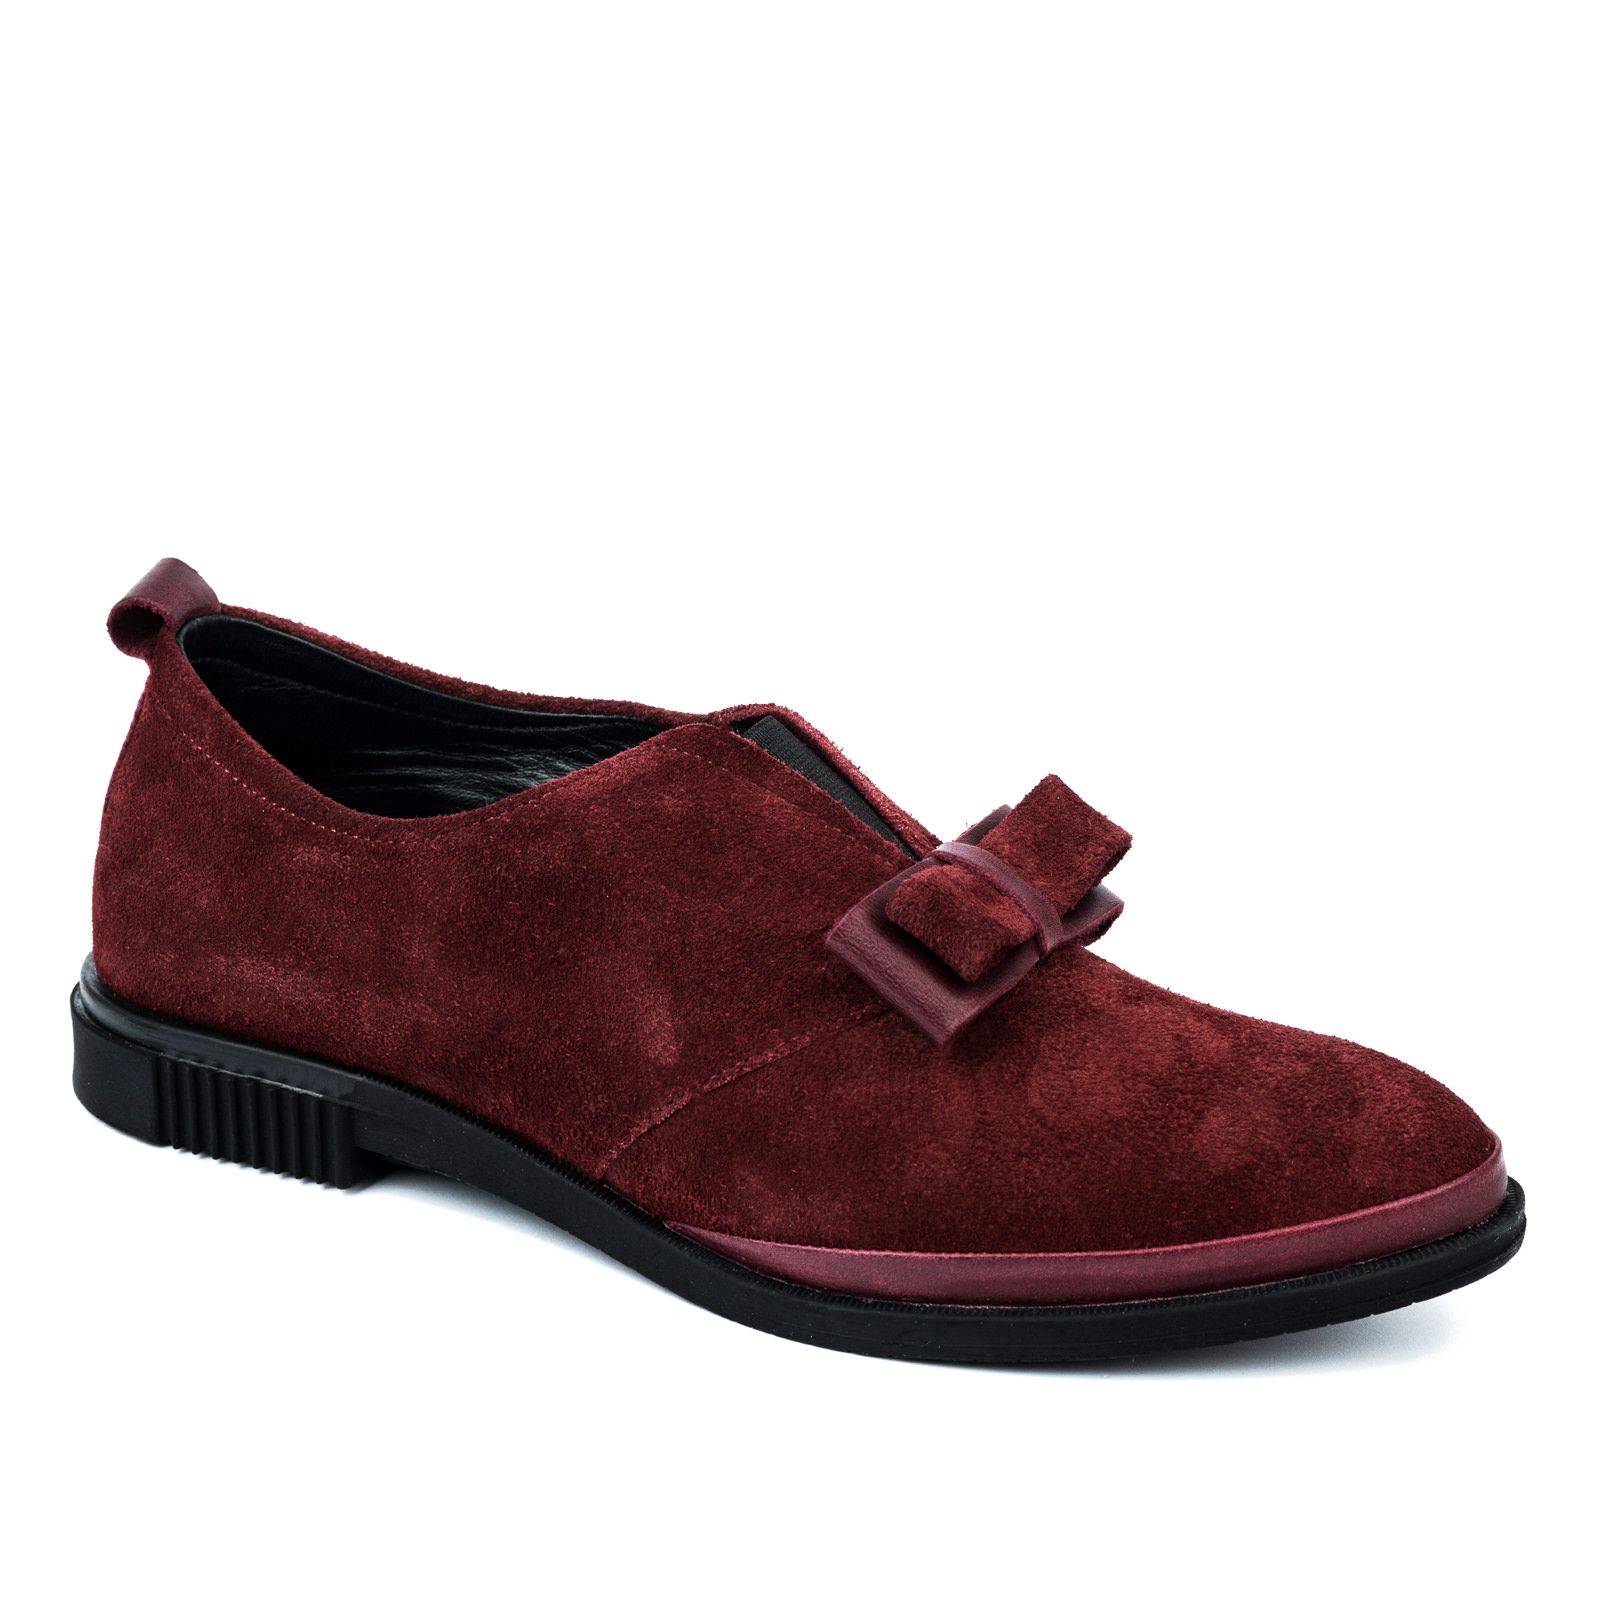 Leather shoes & flats SHIZA - WINE RED